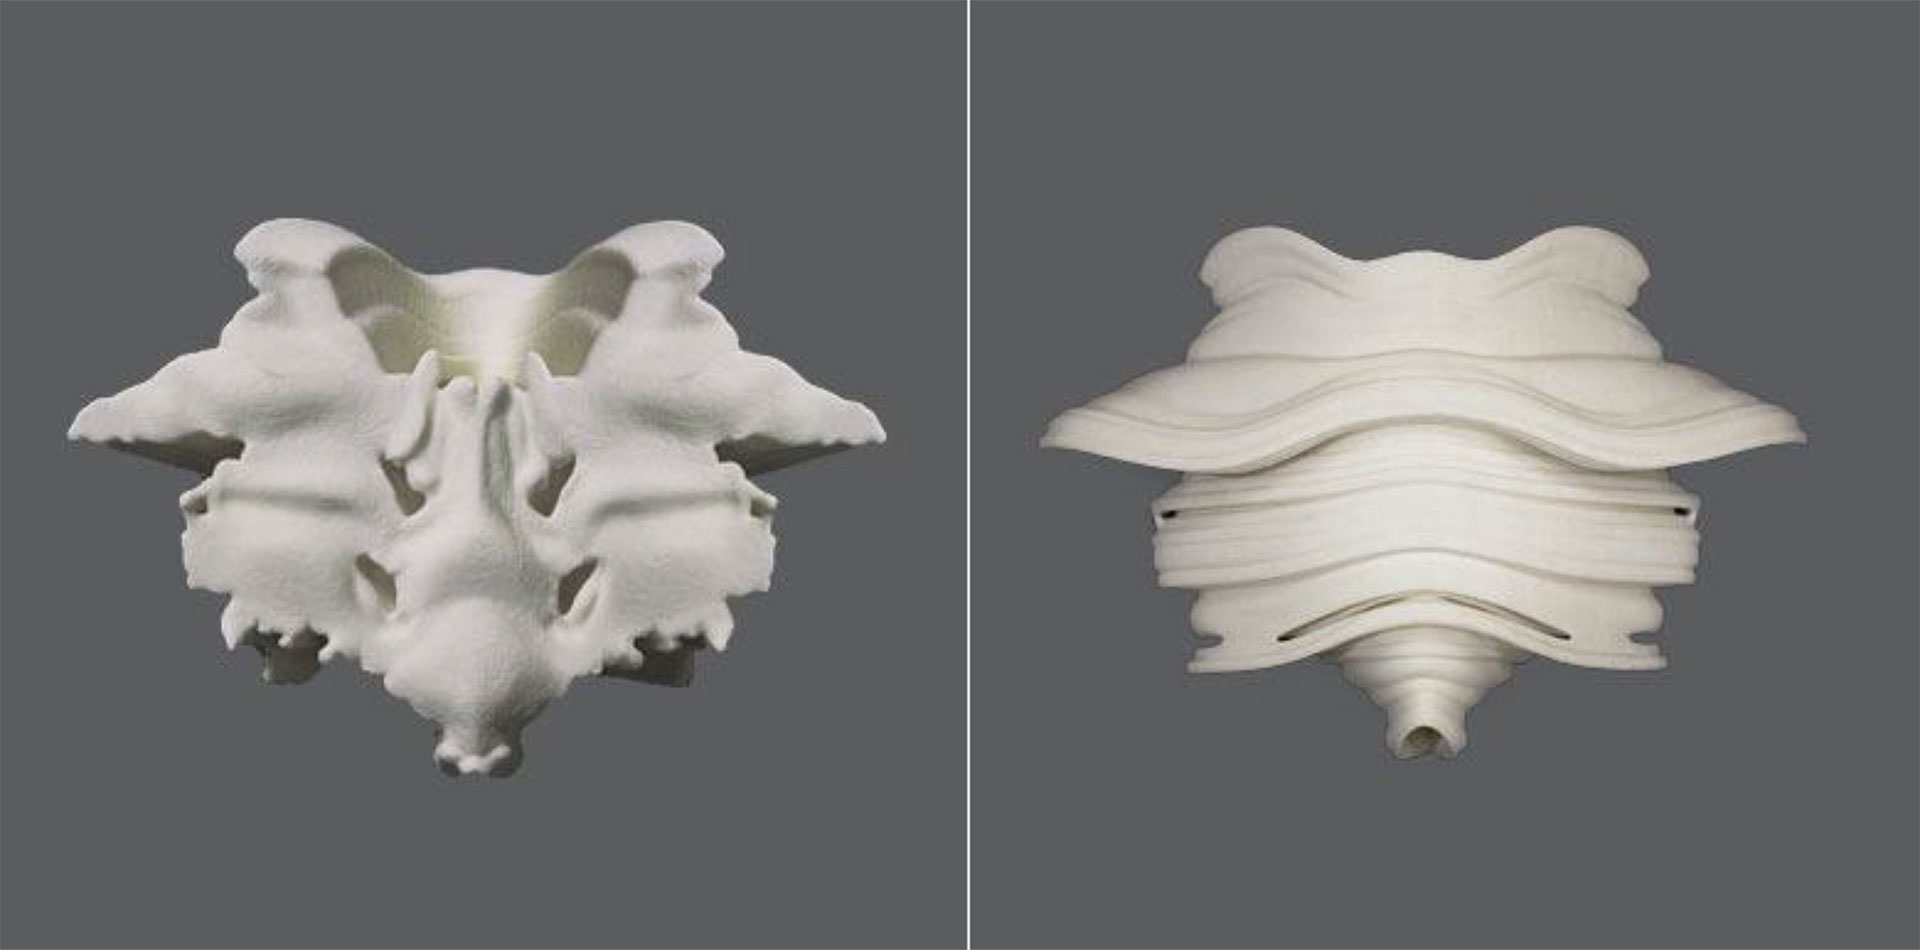 Suzanne Anker, Rorschach series (Wolf), 2004-05. Rapid Prototype Sculpture. Plaster and resin, Edition of 3. 11” x 8” x 3”. $3,000. Also available in 4.5” x 5” x 1”. Plaster and resin; ivory white or painted black, Edition of 6. $500.